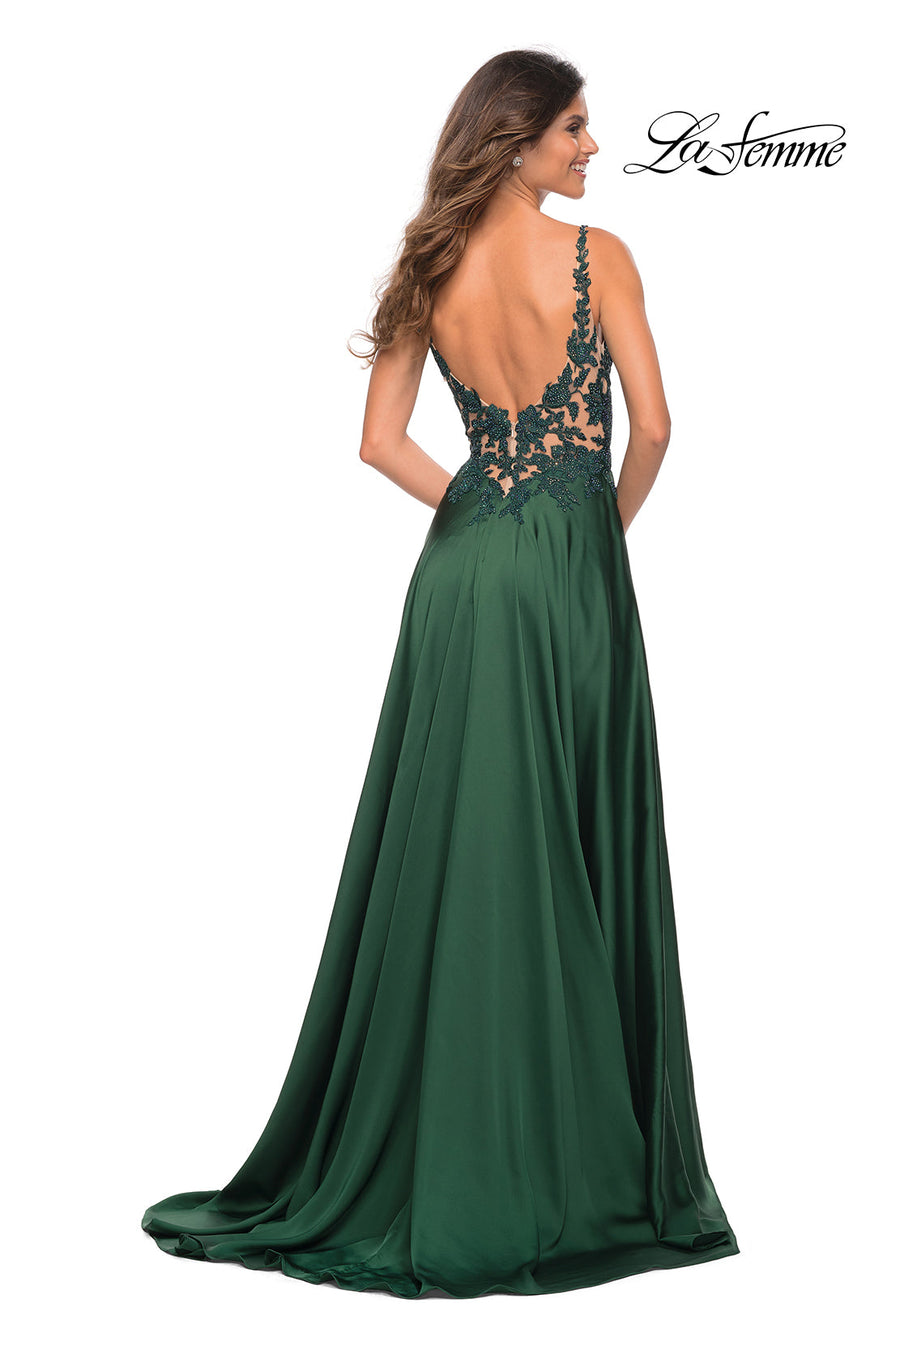 La Femme 30580 prom dress images.  La Femme 30580 is available in these colors: Emerald, Navy.